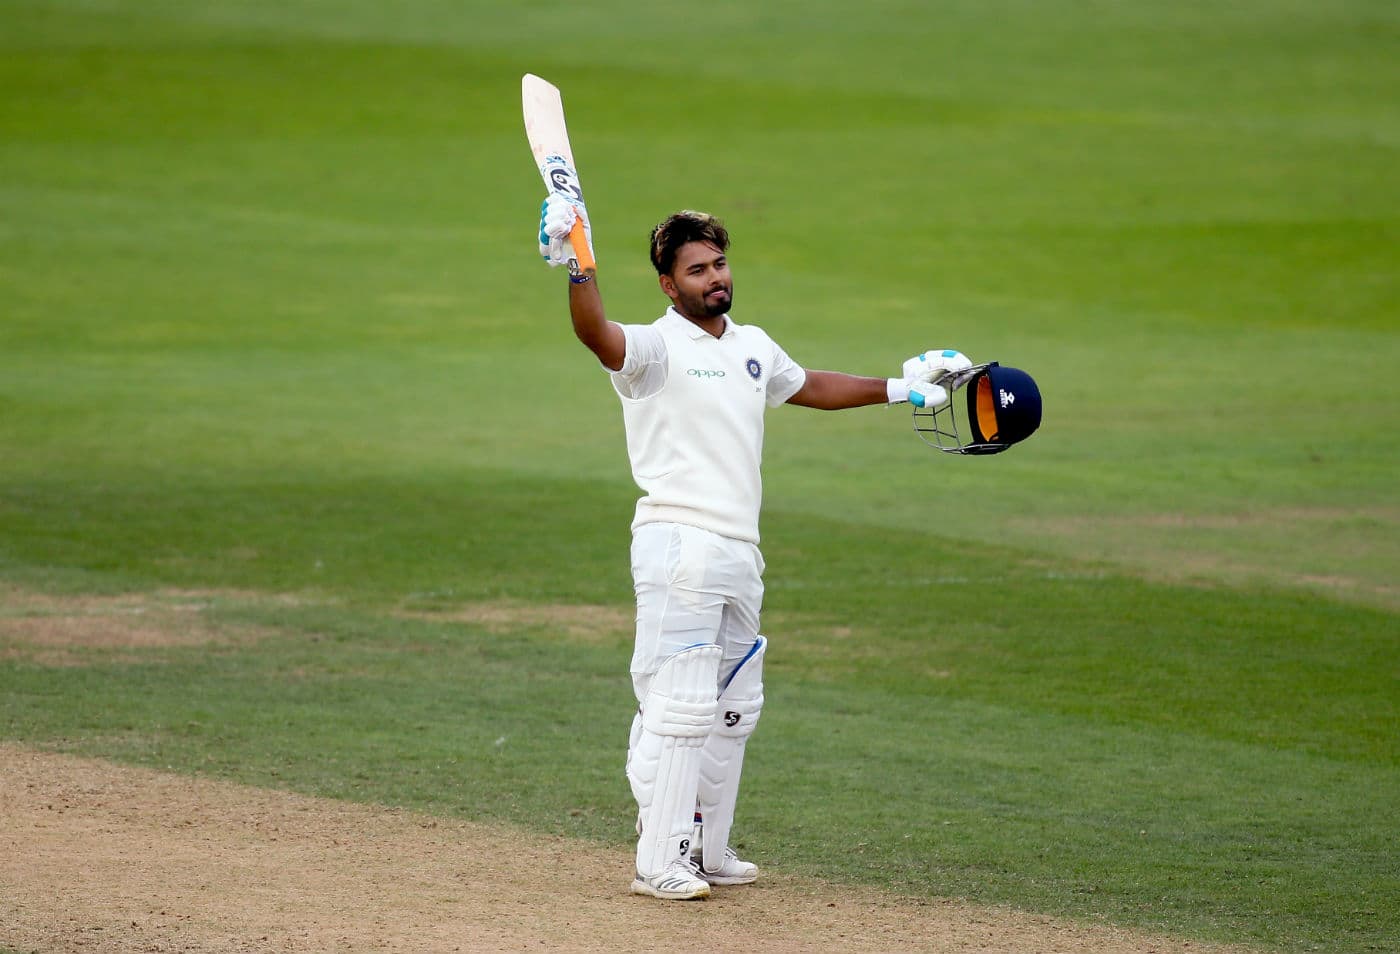 I doesn't want to compete for places with MS Dhoni says Rishabh Pant